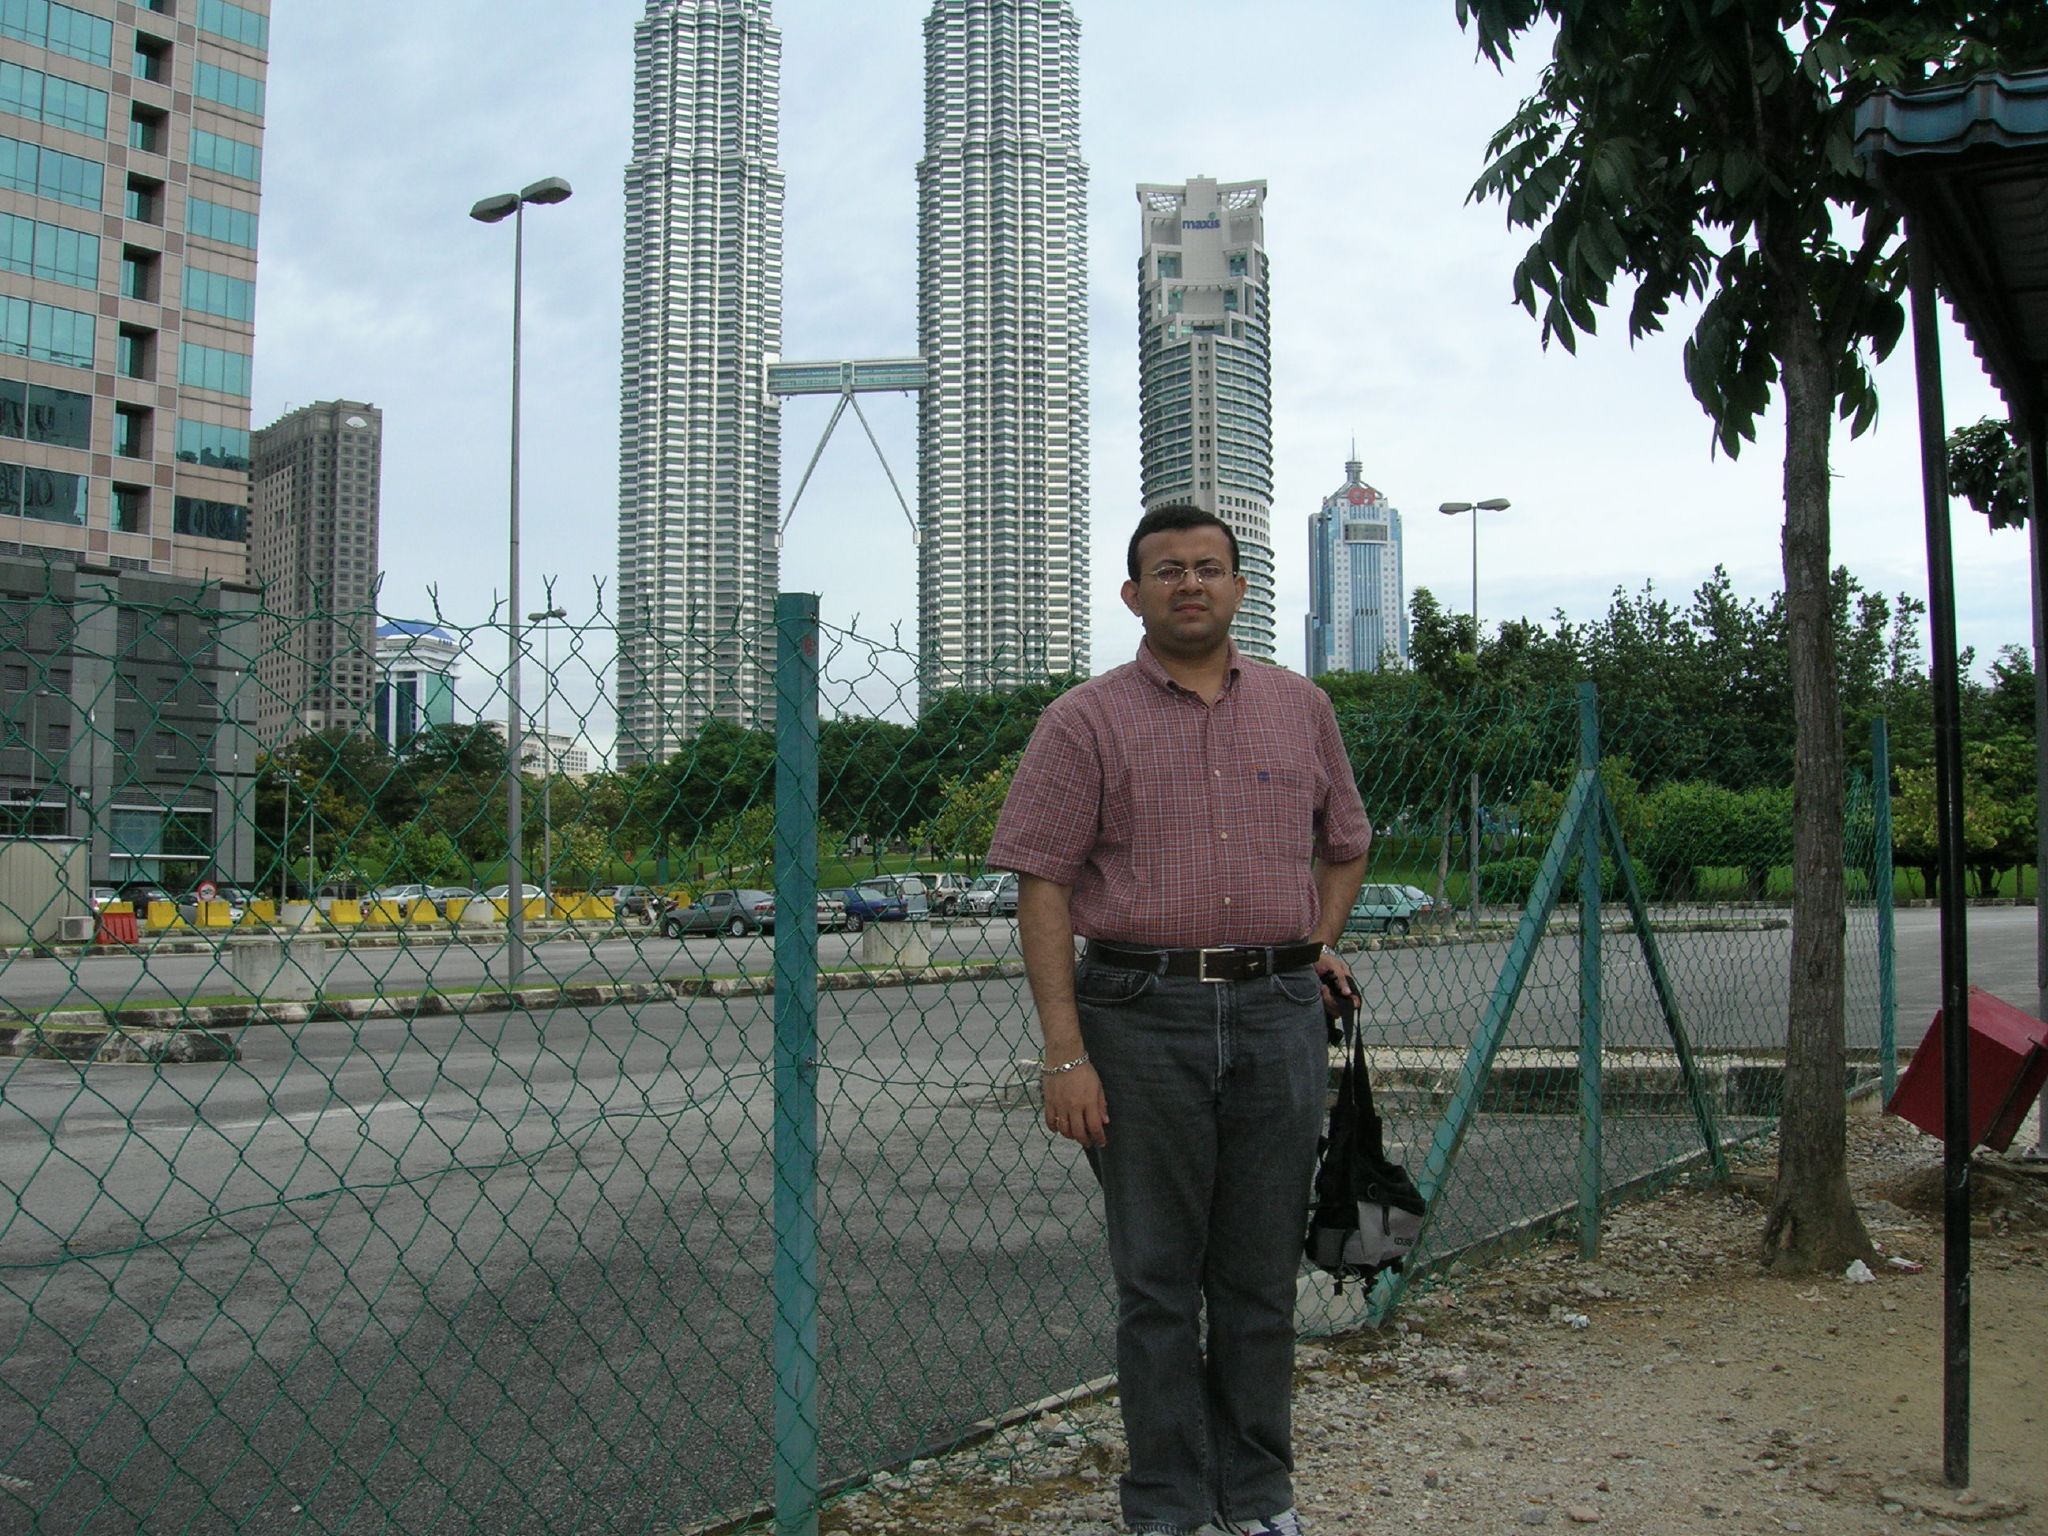 a man stands outside in front of a fence and buildings